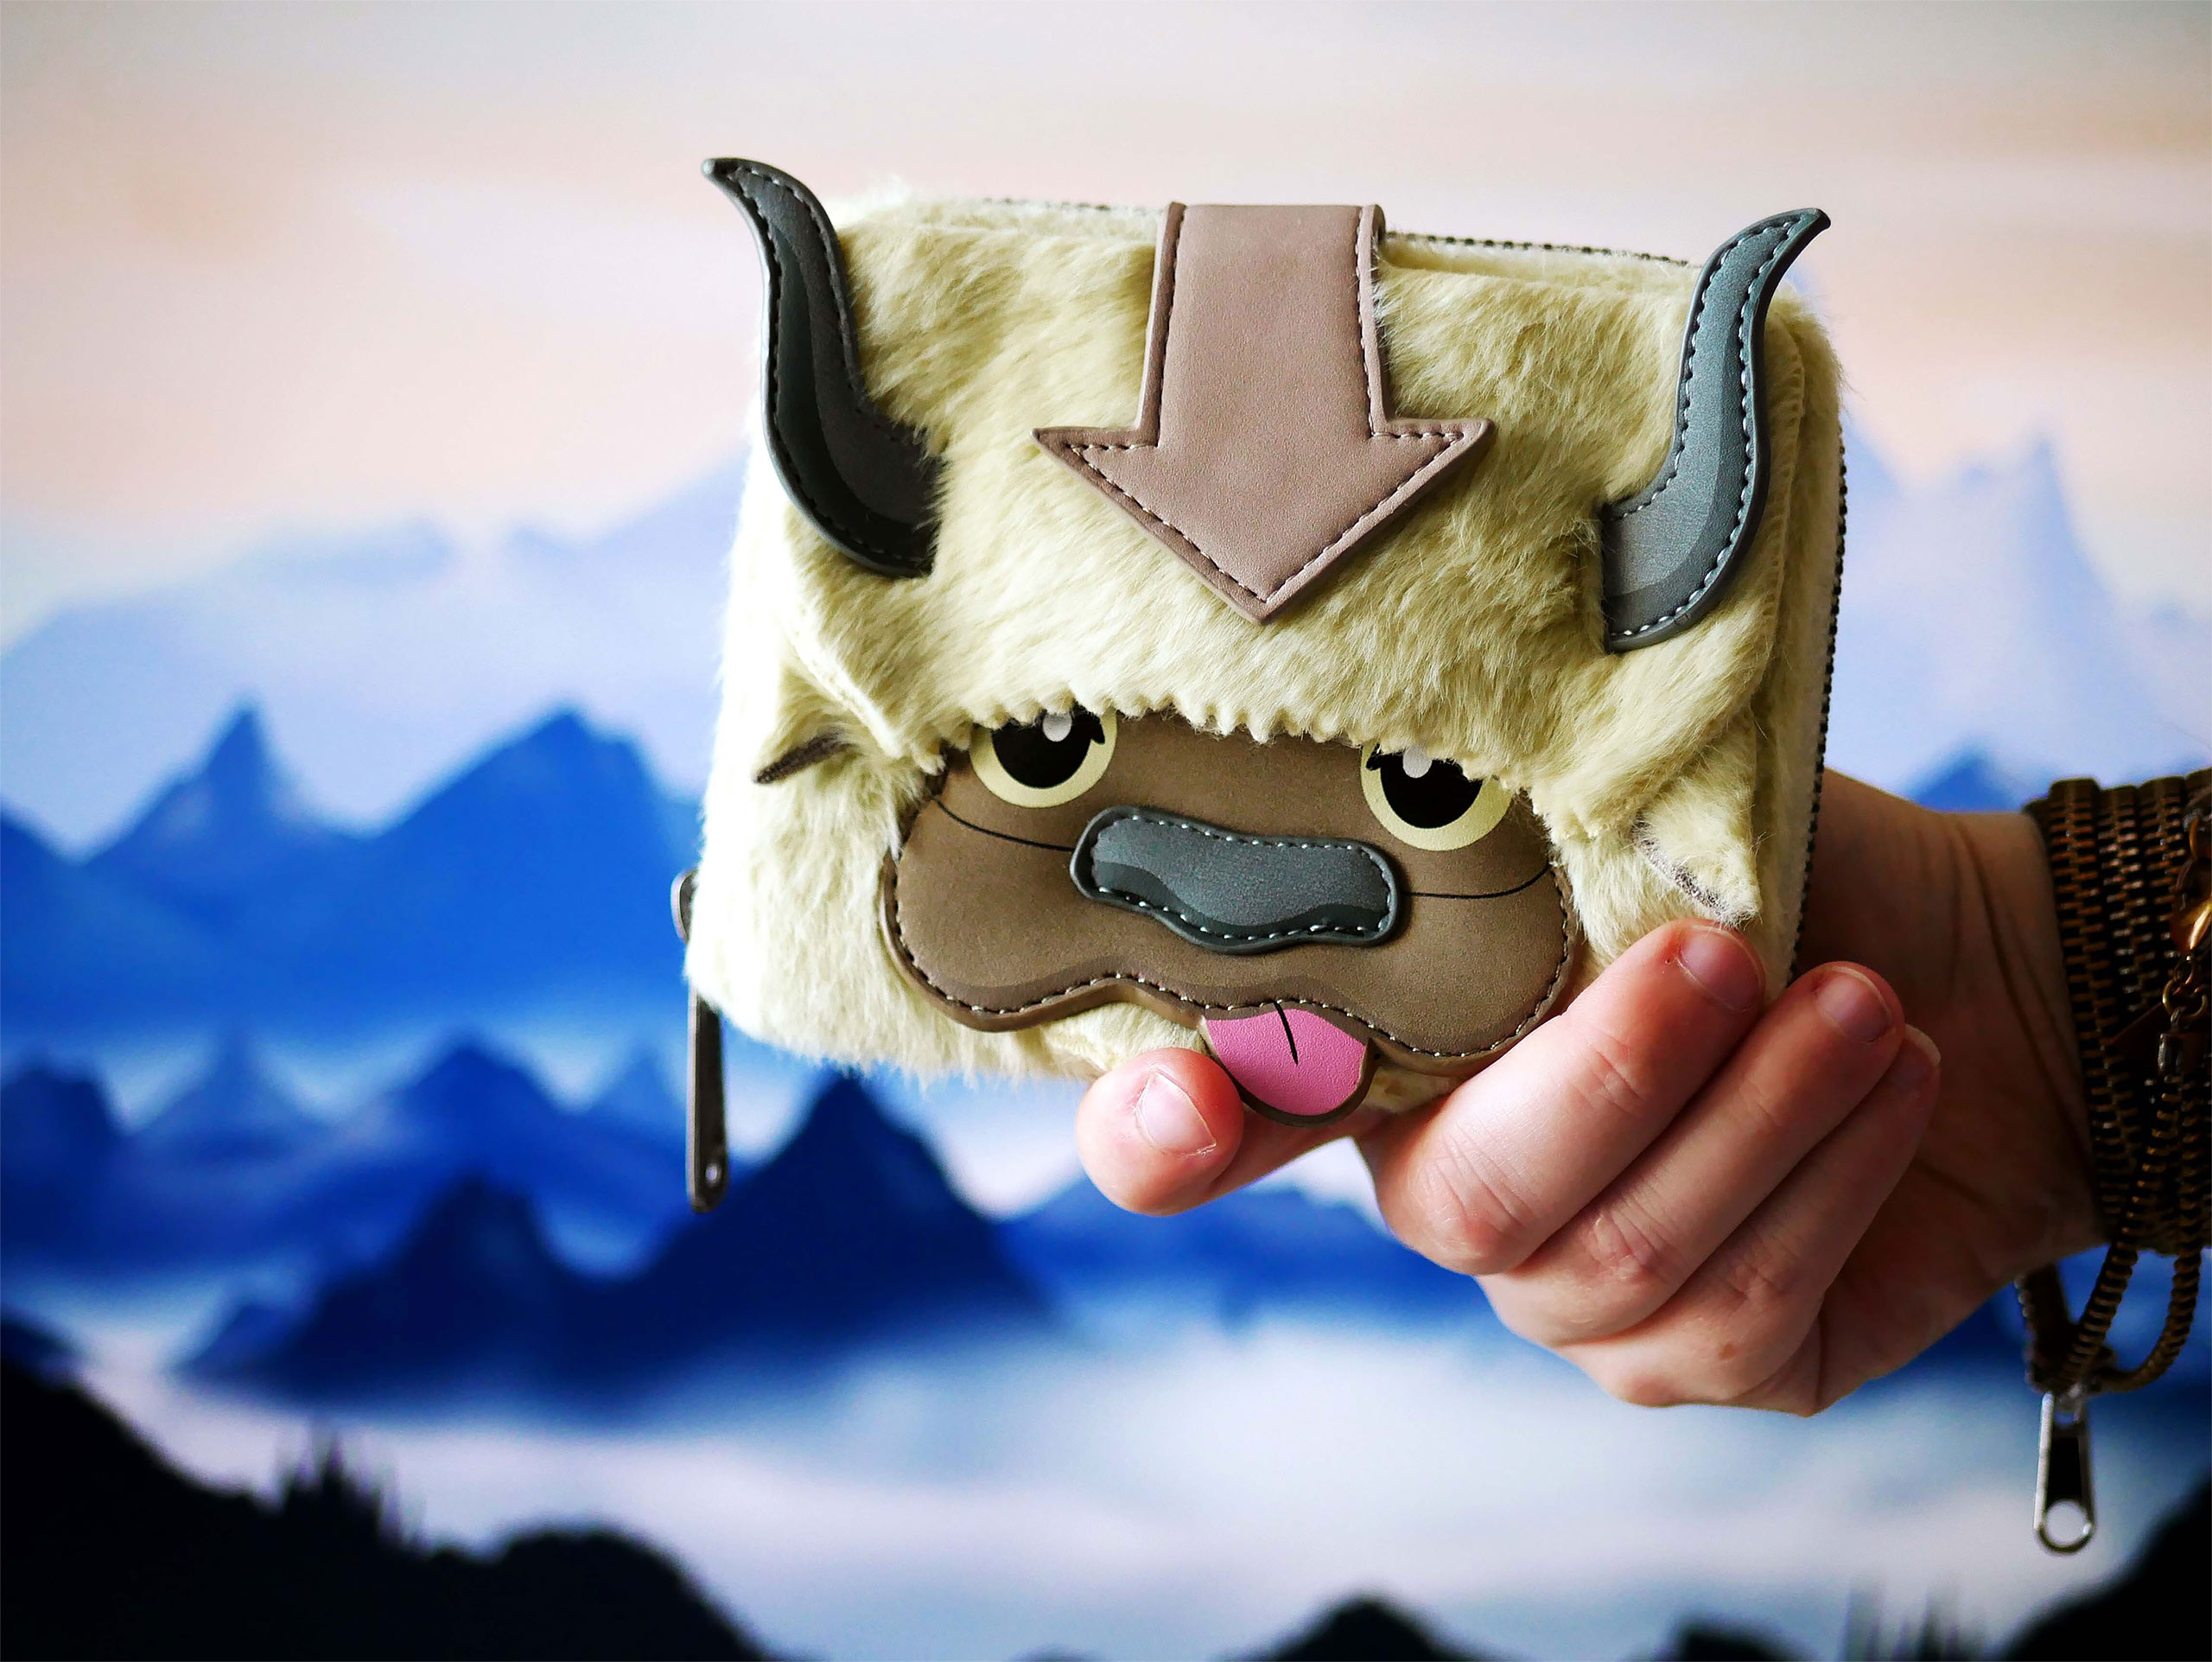 Avatar - Appa with Aang Wallet